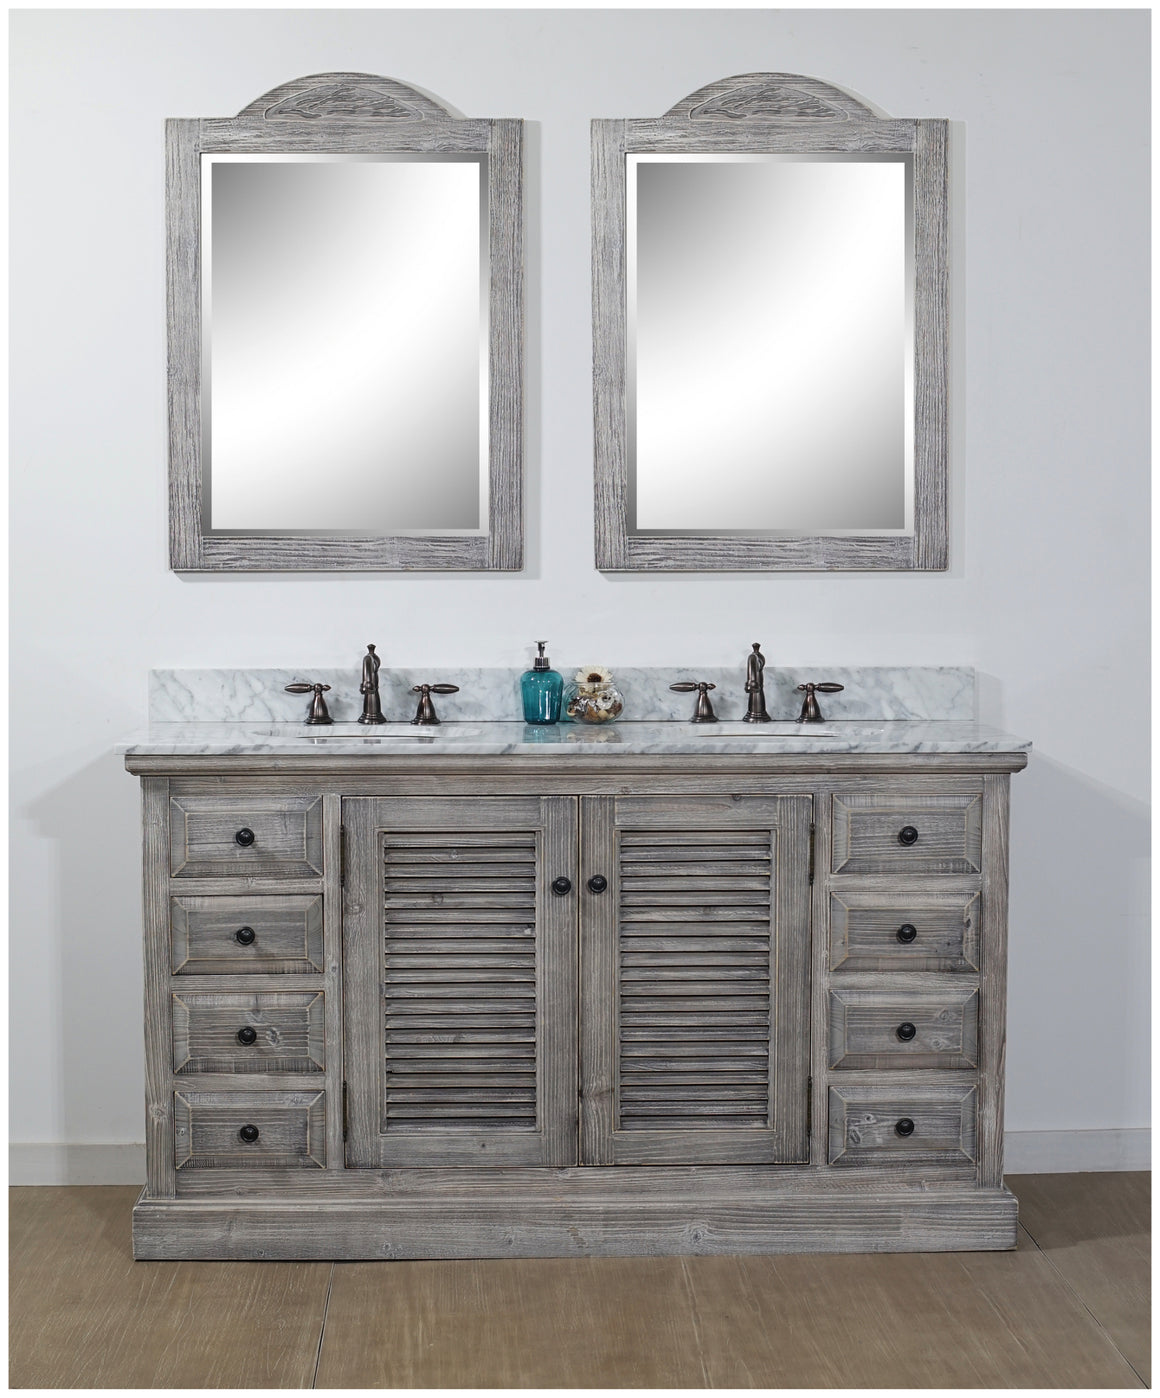 60" RUSTIC SOLID FIR DOUBLE SINKS VANITY IN GREY DRIFTWOOD WITH CARRARA WHITE MARBLE TOP-NO FAUCET